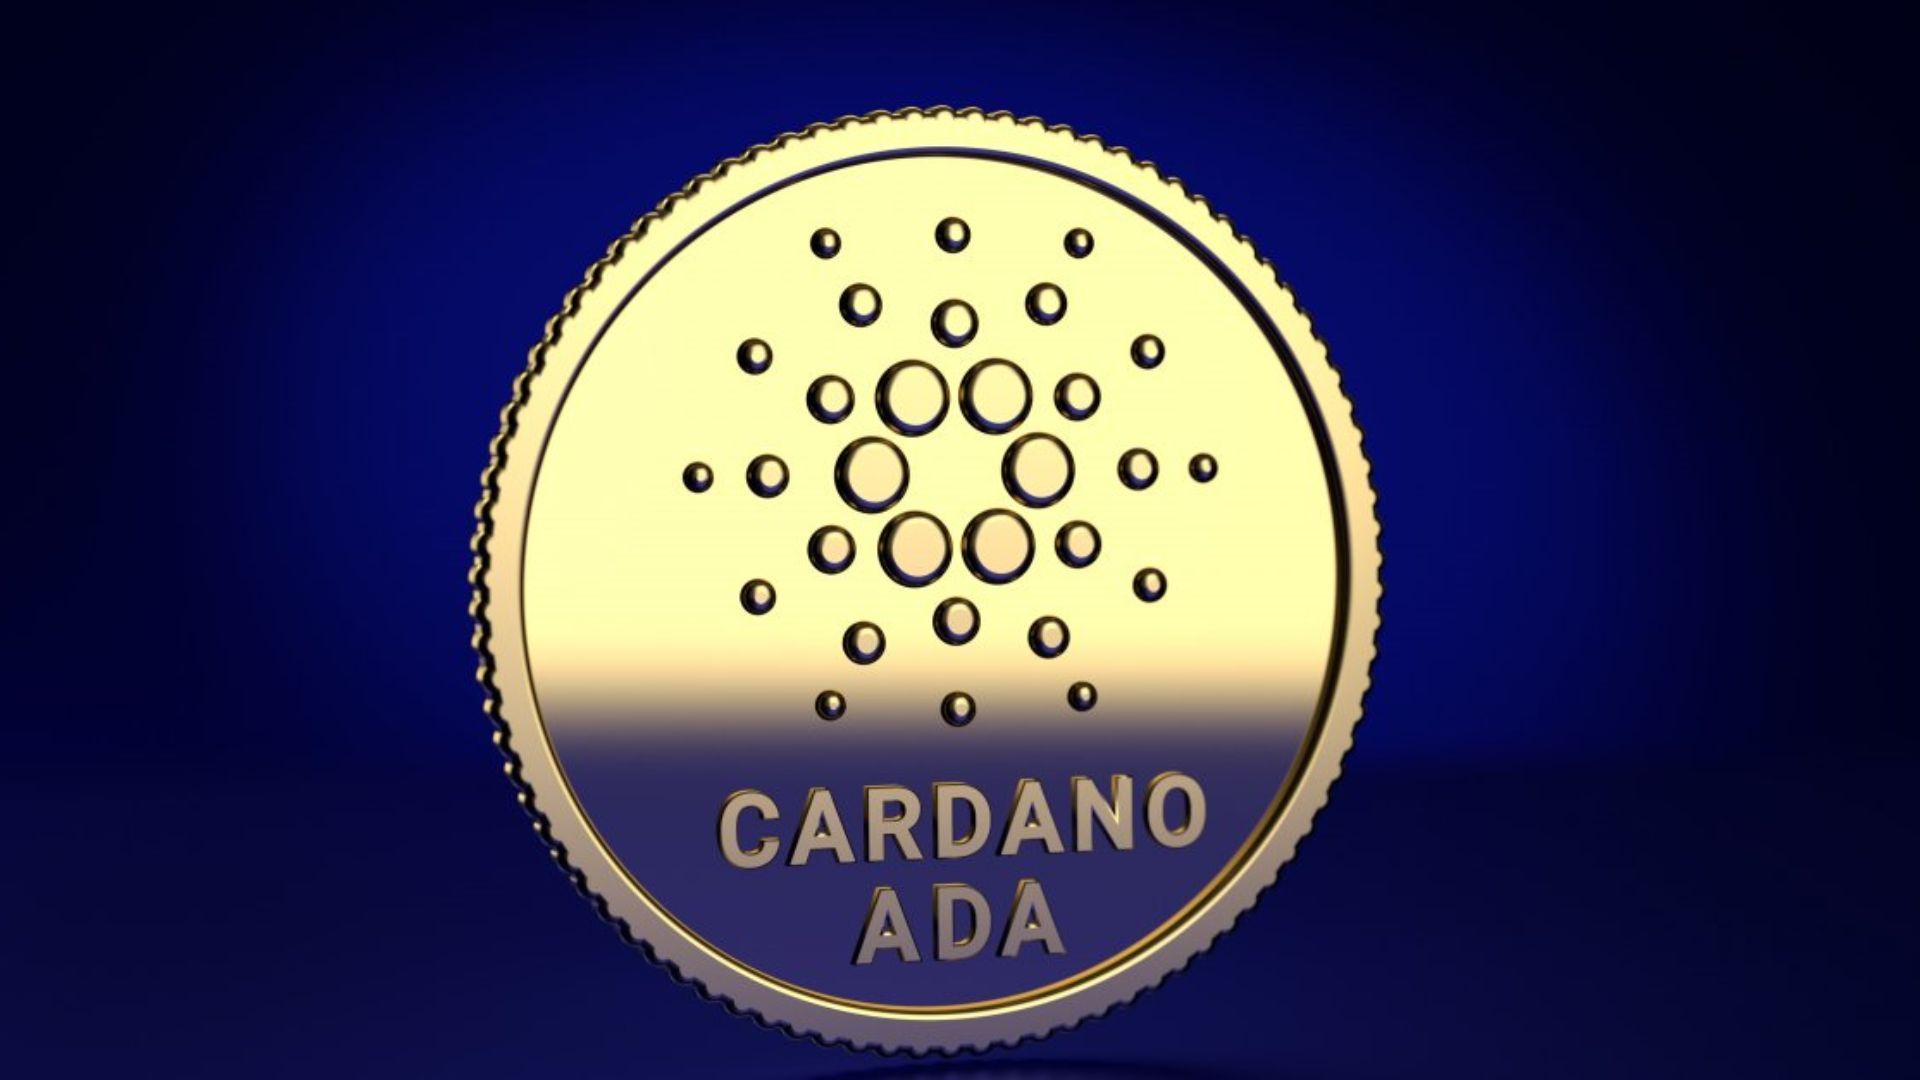 Cardano Price Prediction: ADA Plunges Almost 7% As FOMO Frenzy Erupts Around This New Telegram Casino Before A Price Hike